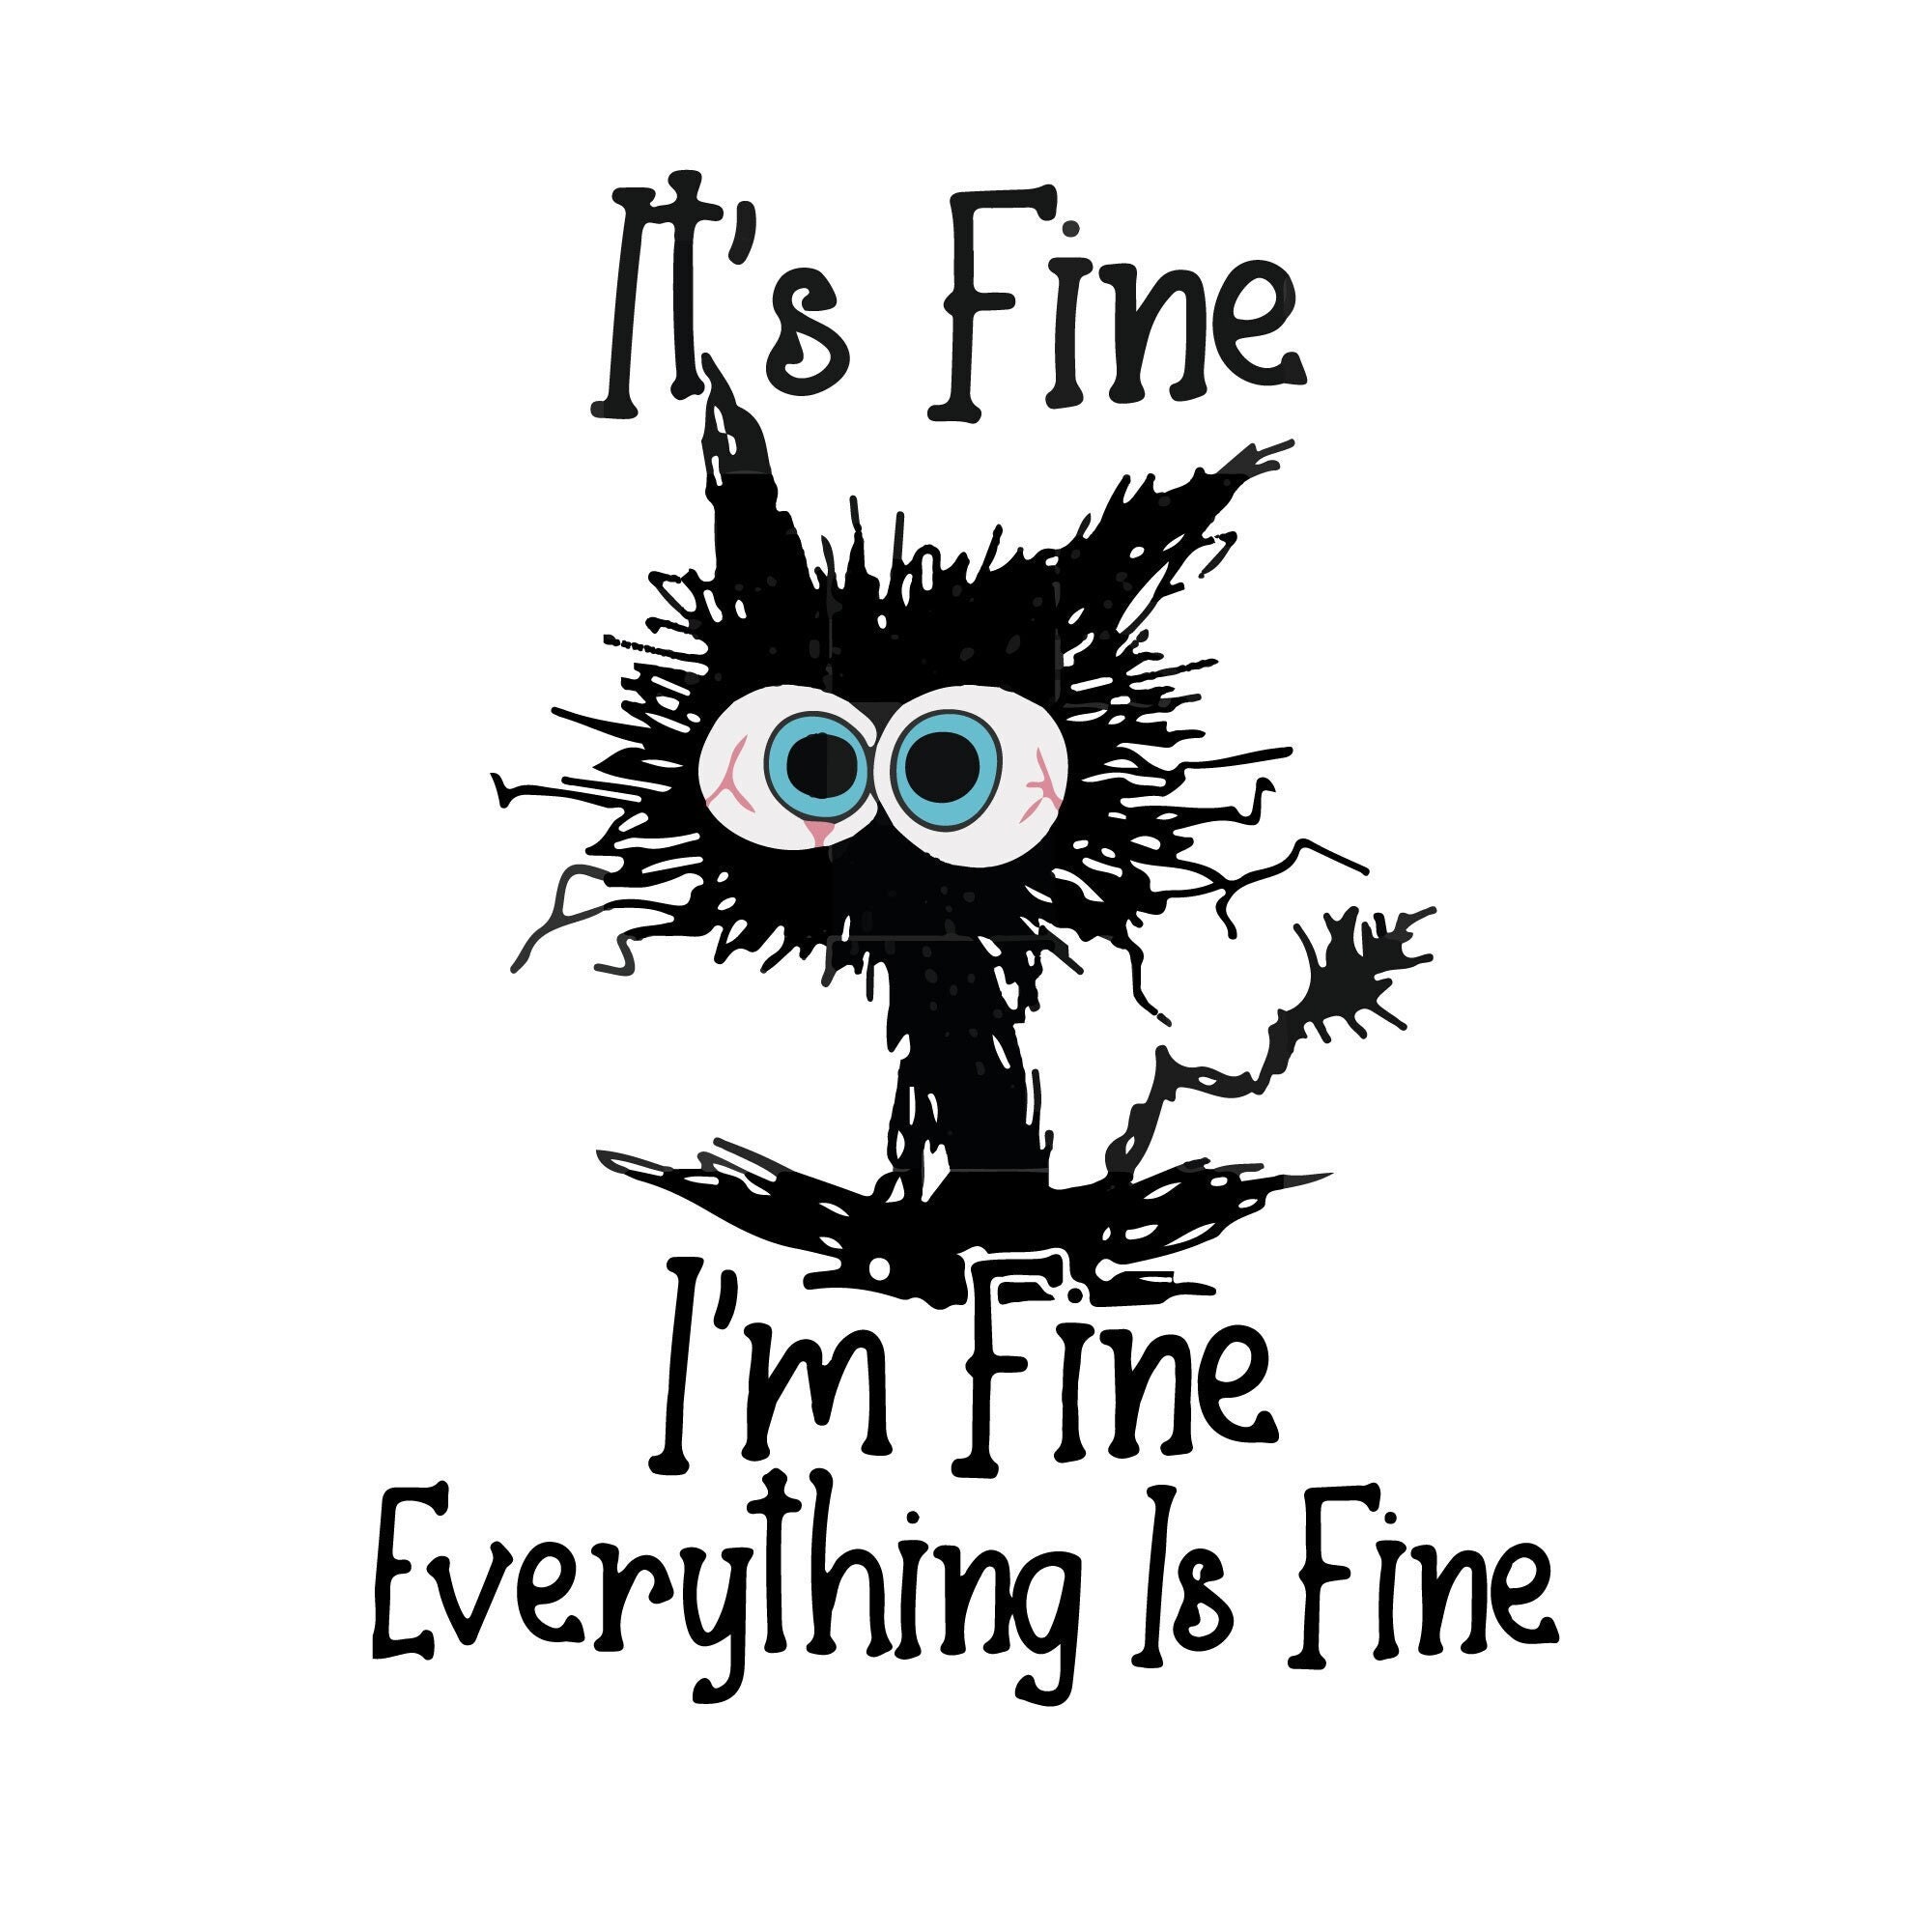 I'm fine, this is fine, everything's fine badge reel – Sierra's